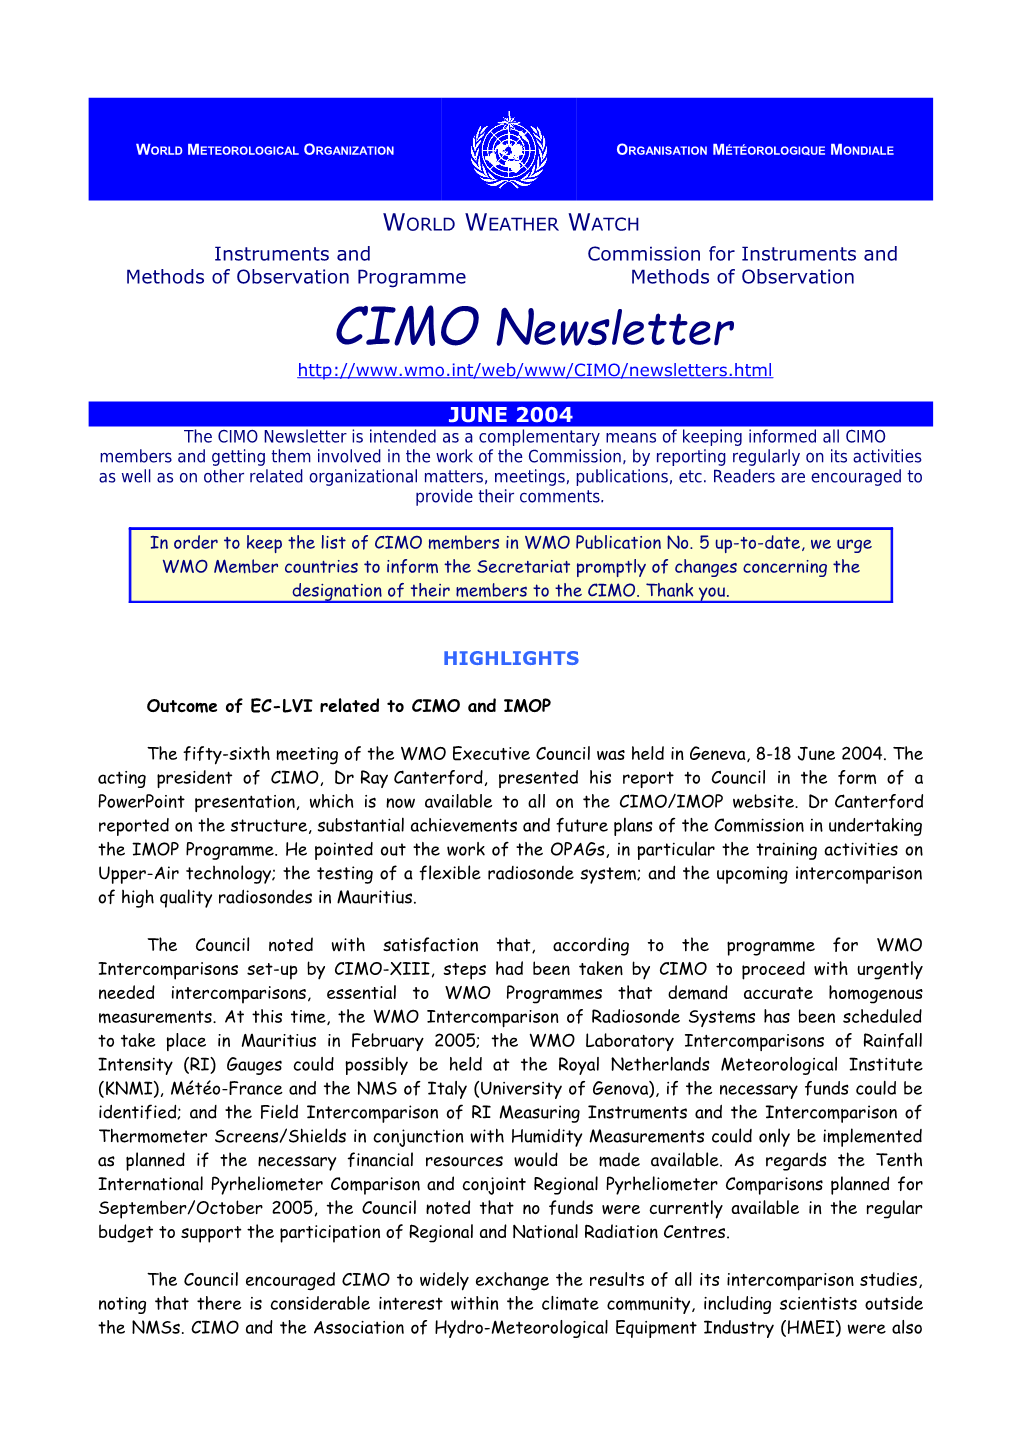 Outcome of EC-LVI Related to CIMO and IMOP